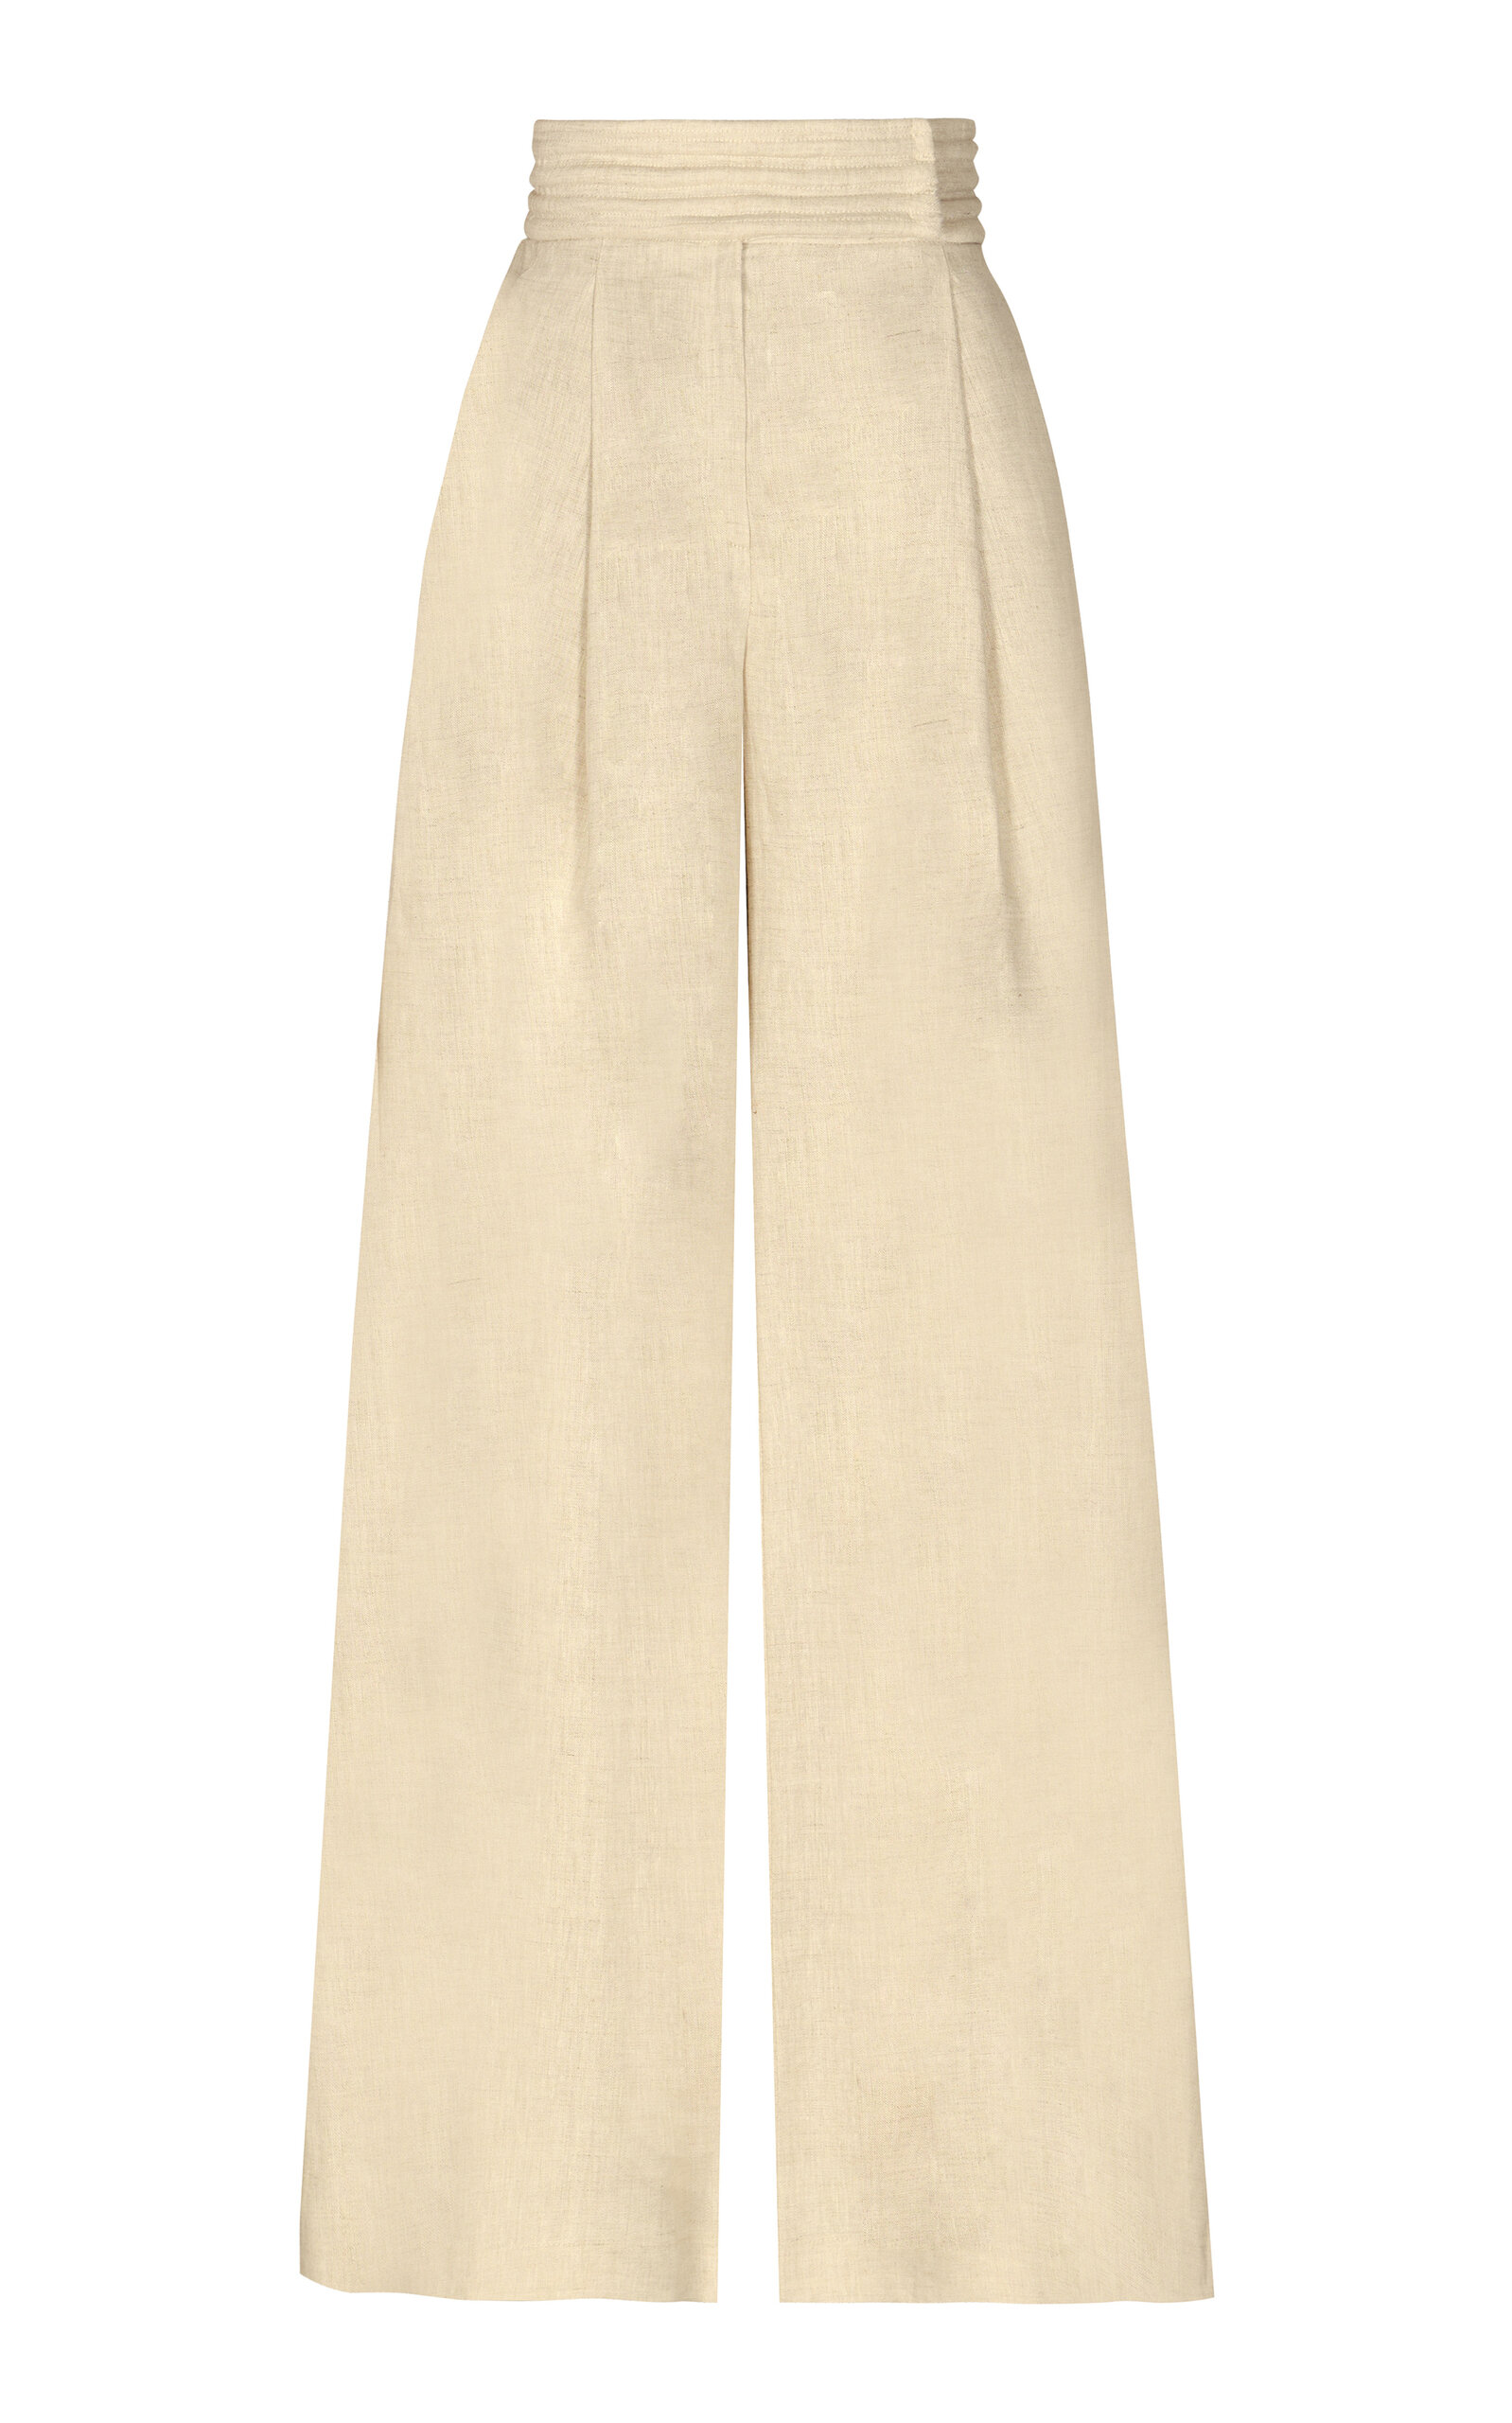 Andres Otalora Vinales Pleated Linen Wide-leg Trousers In Tan